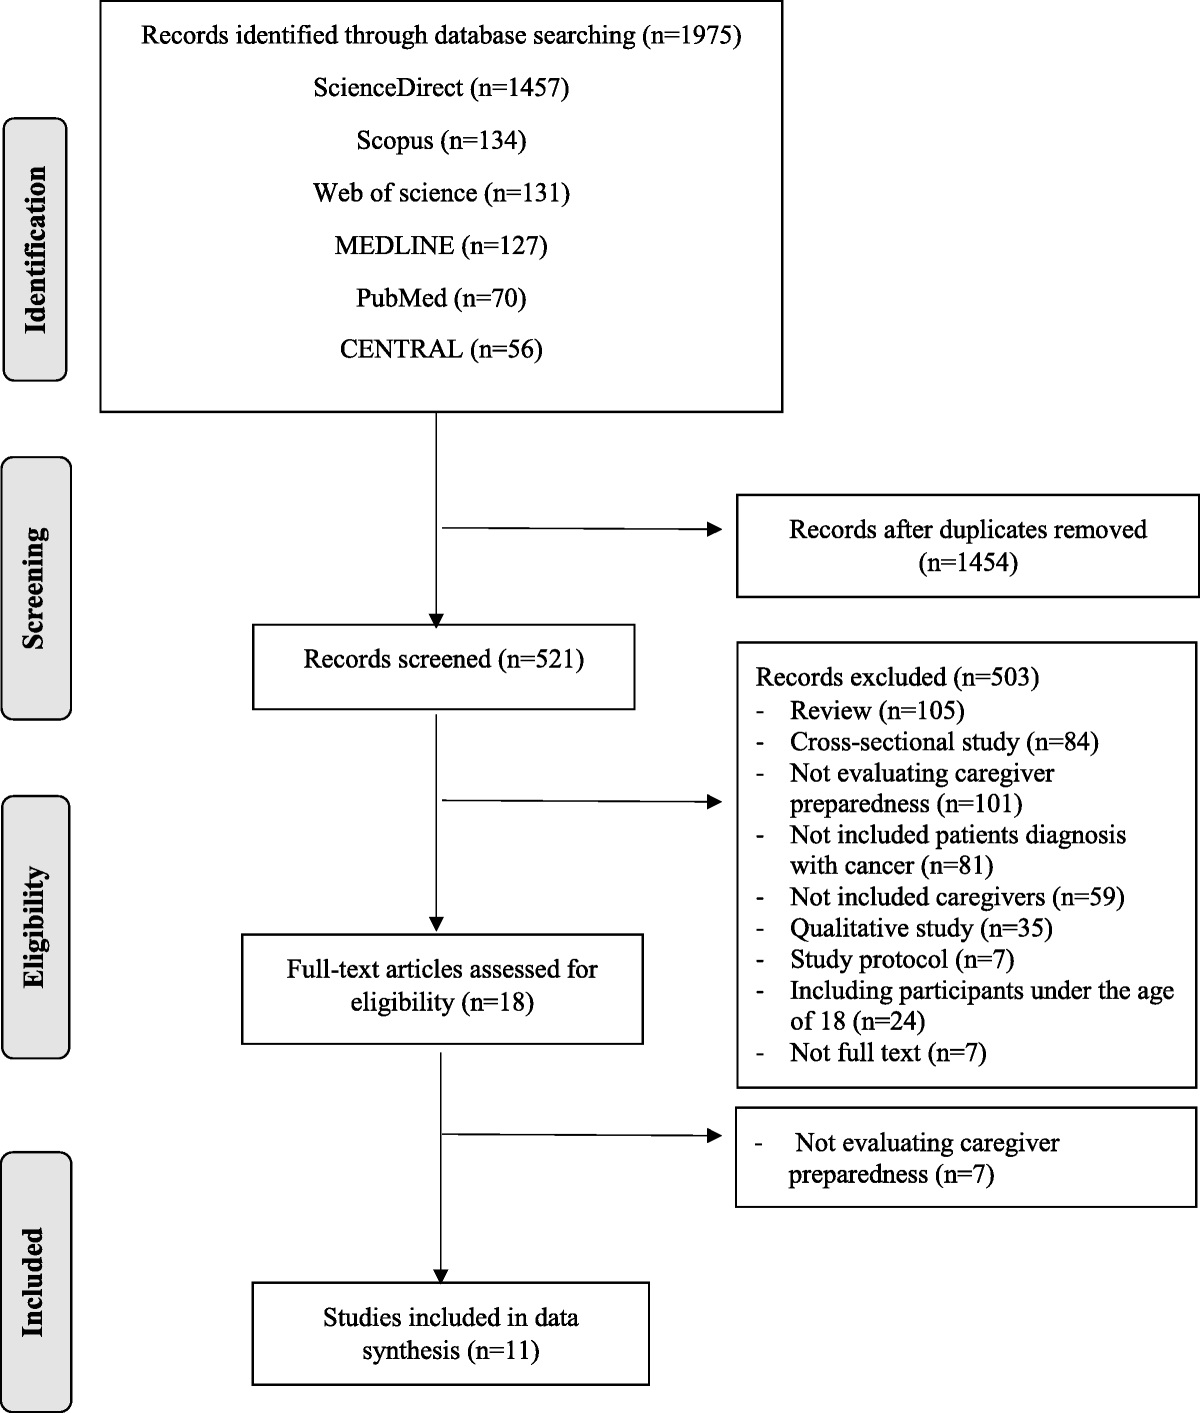 Interventions to Improve the Preparedness to Care for Family Caregivers of Cancer Patients: A Systematic Review and Meta-analysis